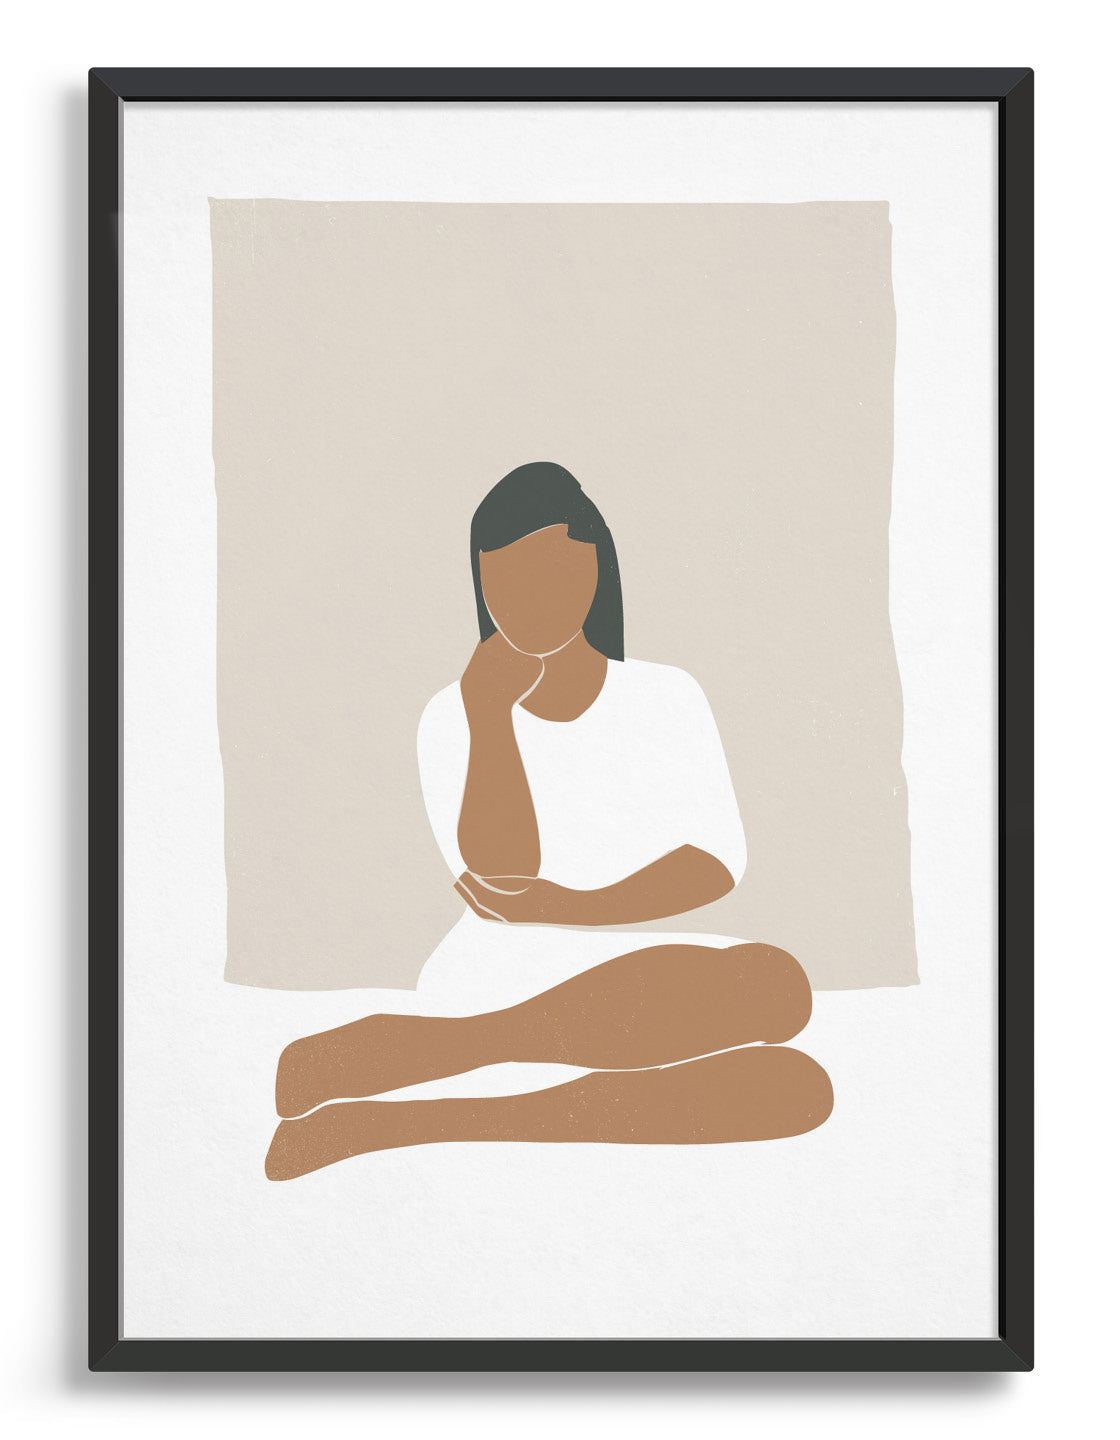 Abstract art print of woman in muted tones sitting with knees to one side and hand on chin